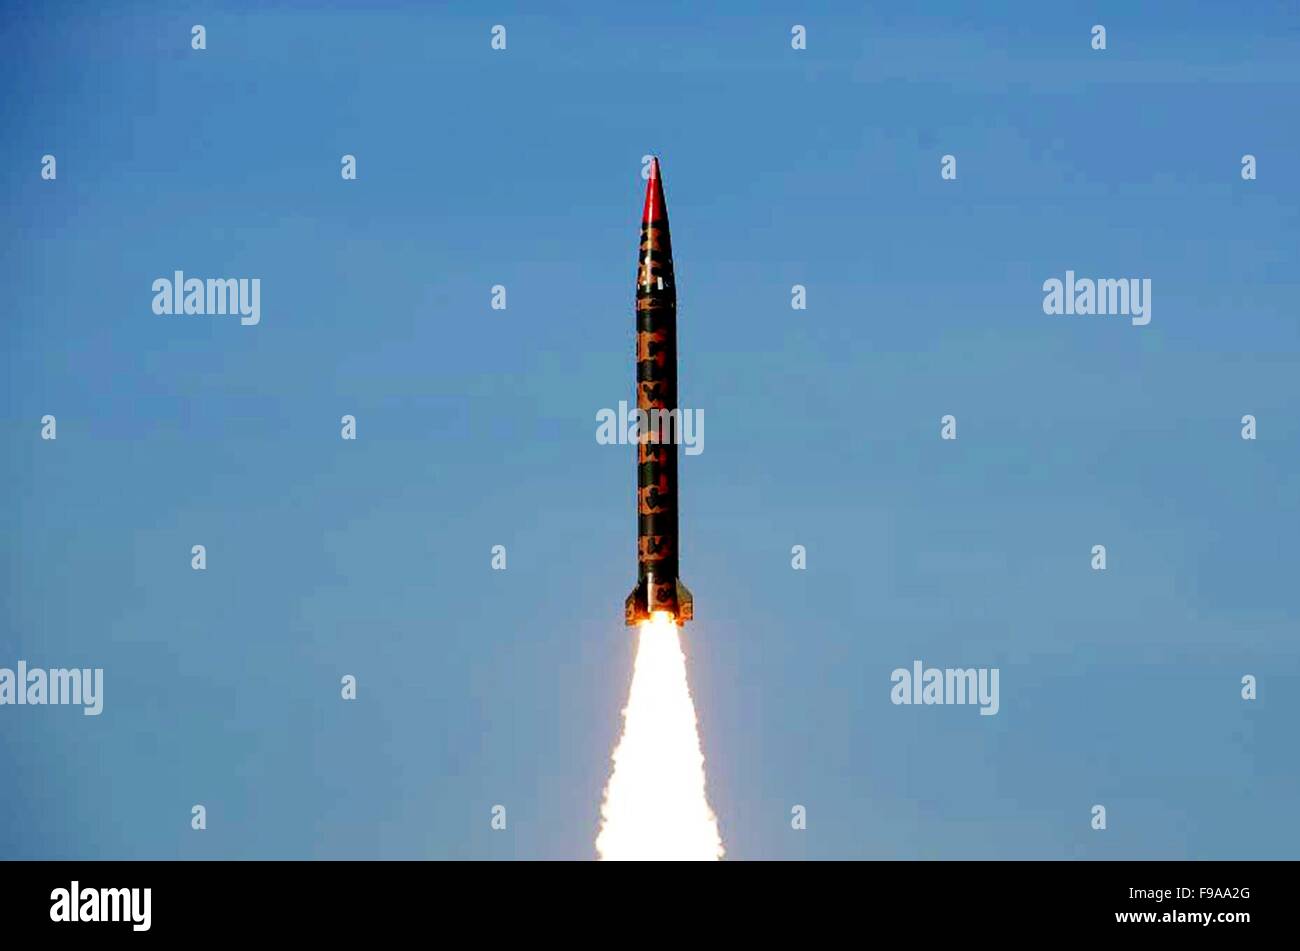 Islamabad. 15th Dec, 2015. Photo released by Pakistan's Inter Services Public Relations (ISPR) shows a Shaheen 1A ballistic missile being launched from an undisclosed location in Pakistan, Dec. 15, 2015. Pakistan on Tuesday conducted a successful flight test of a ballistic missile capable of delivering different types of warheads to a range of 900 kilometers, the military said. © ISPR/Xinhua/Alamy Live News Stock Photo